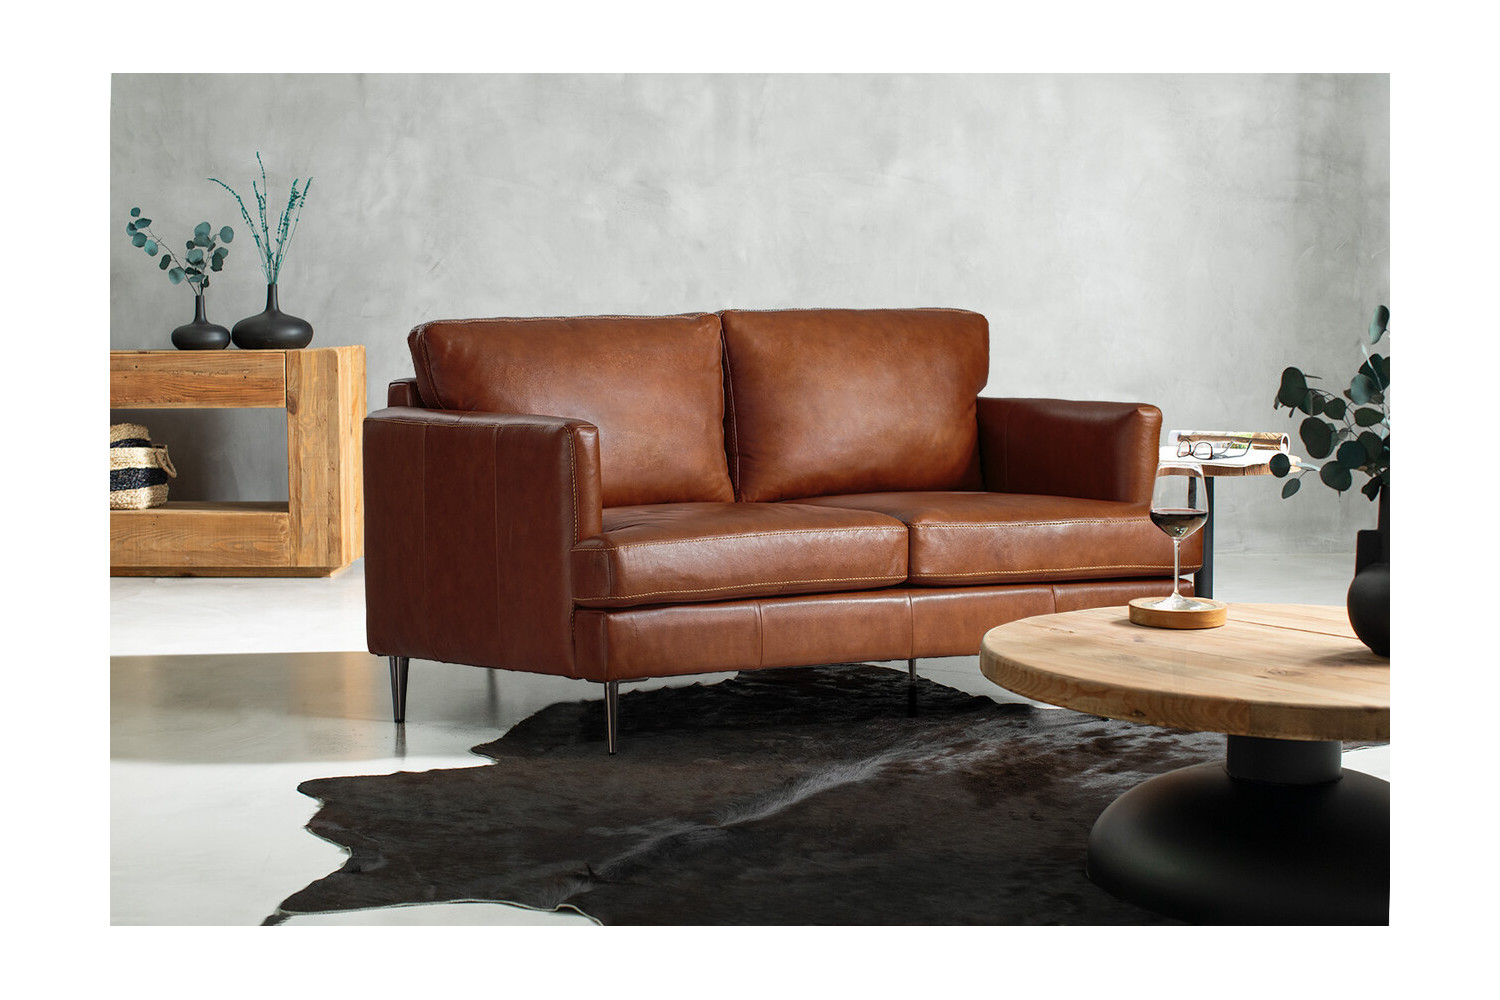 Remington 2-Seater Leather Couch - Burnt Tan 2 Seater Leather Couches - 1